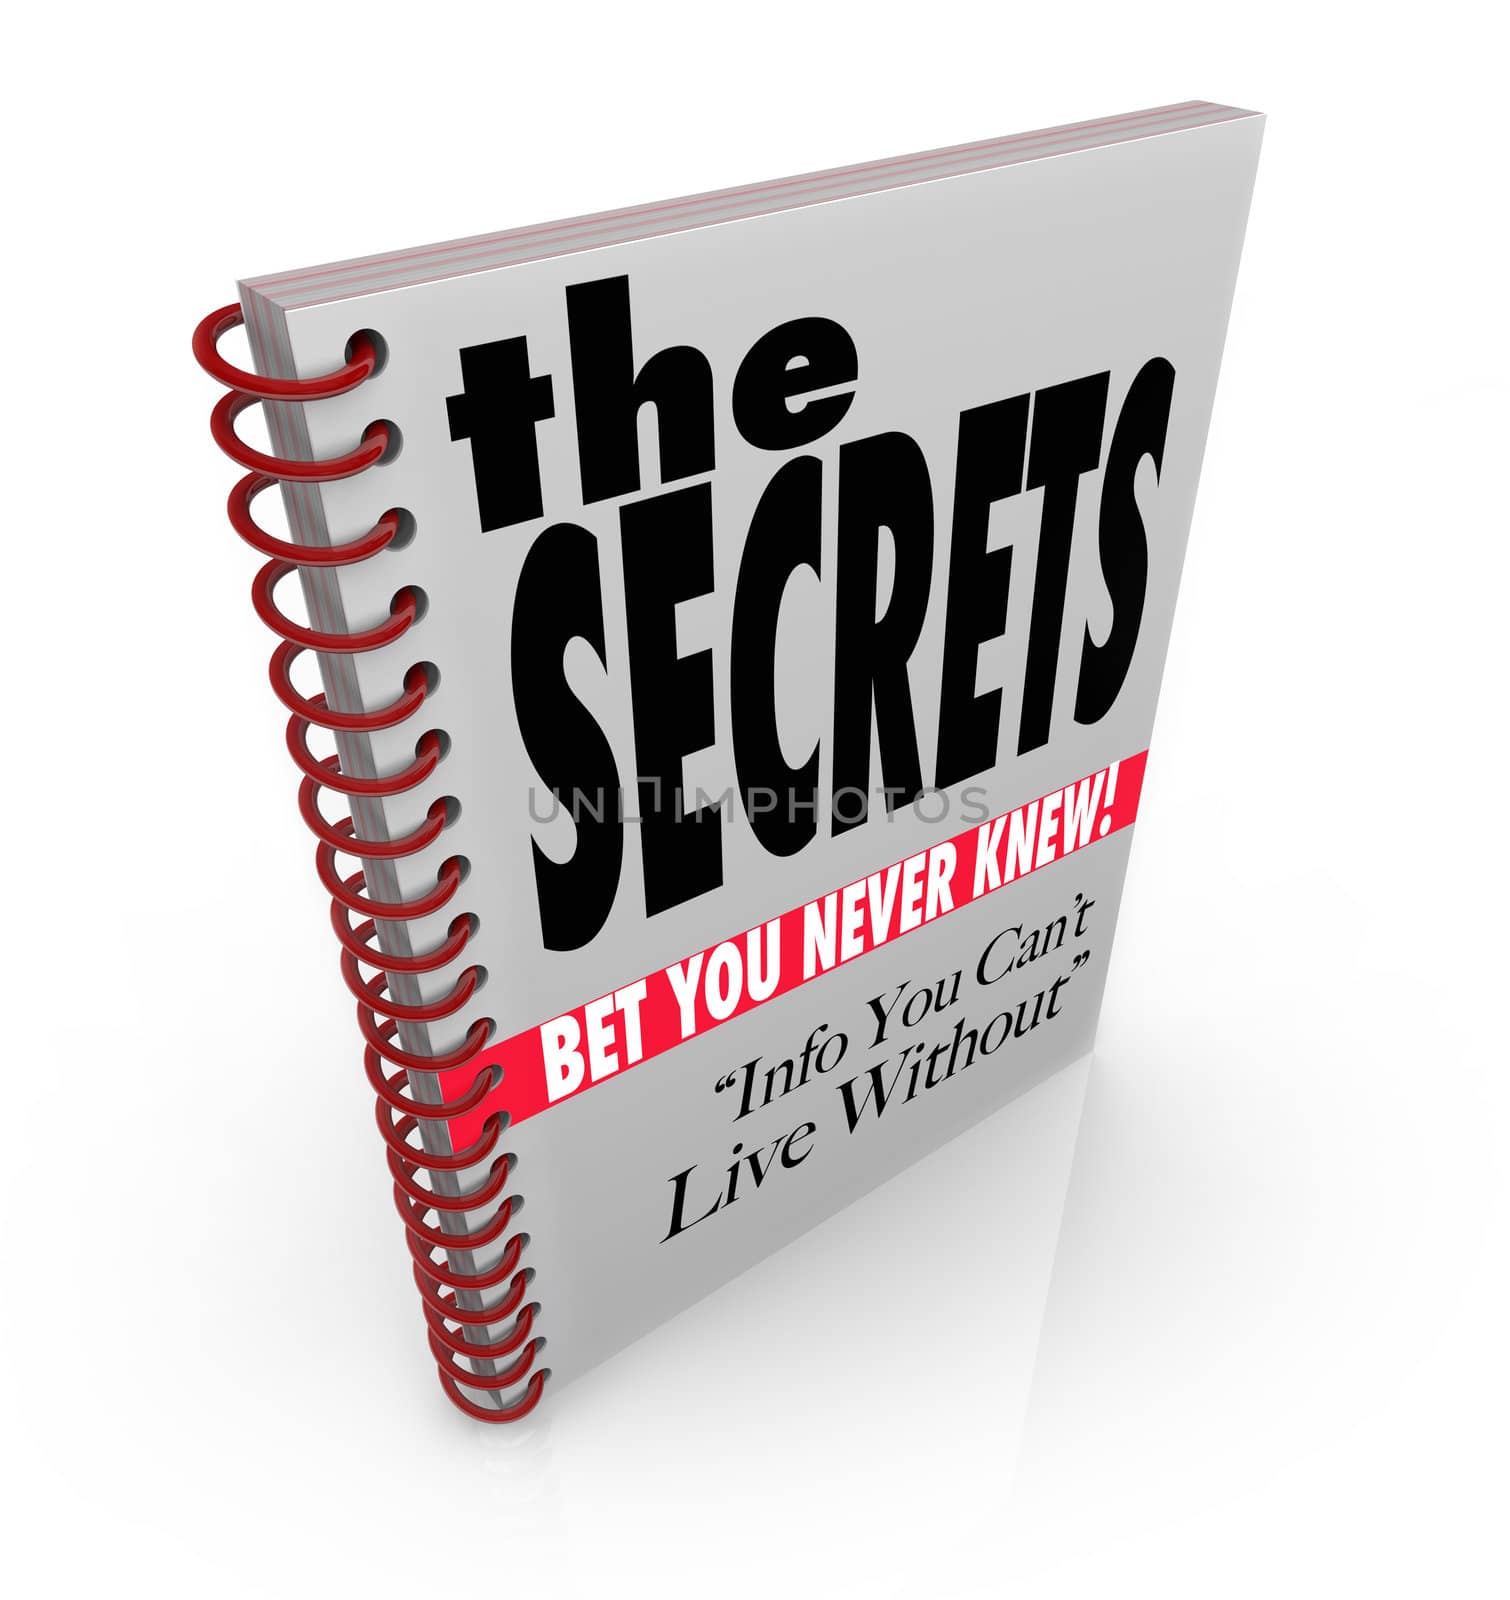 A spiral bound book with headlines reading The Secrets - Bet You Never Knew, and Info You Can't Live Without, a publication sharing hidden facts and instructions to help you